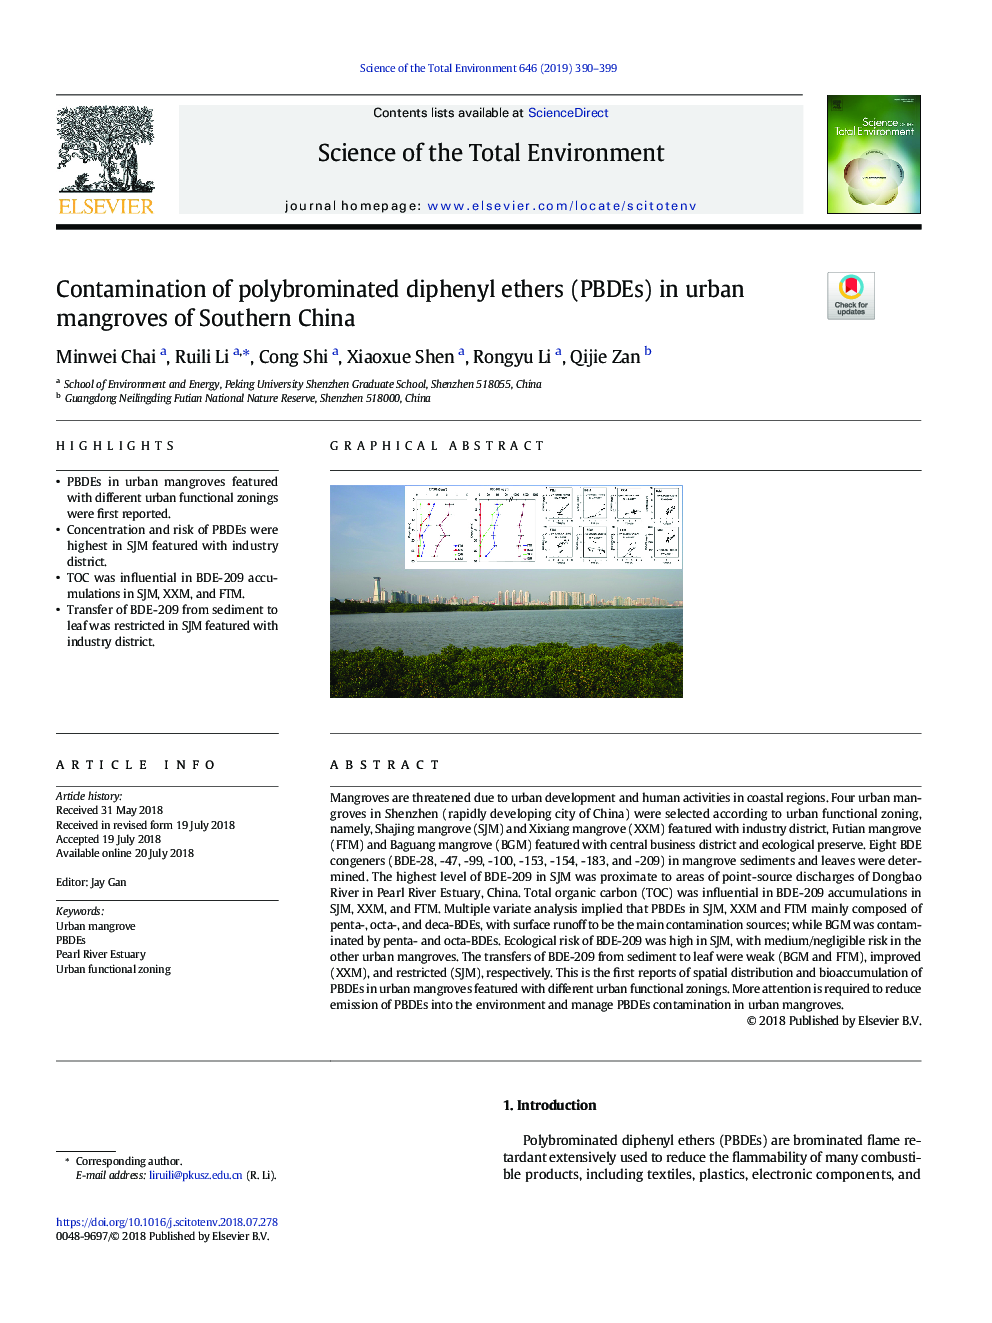 Contamination of polybrominated diphenyl ethers (PBDEs) in urban mangroves of Southern China